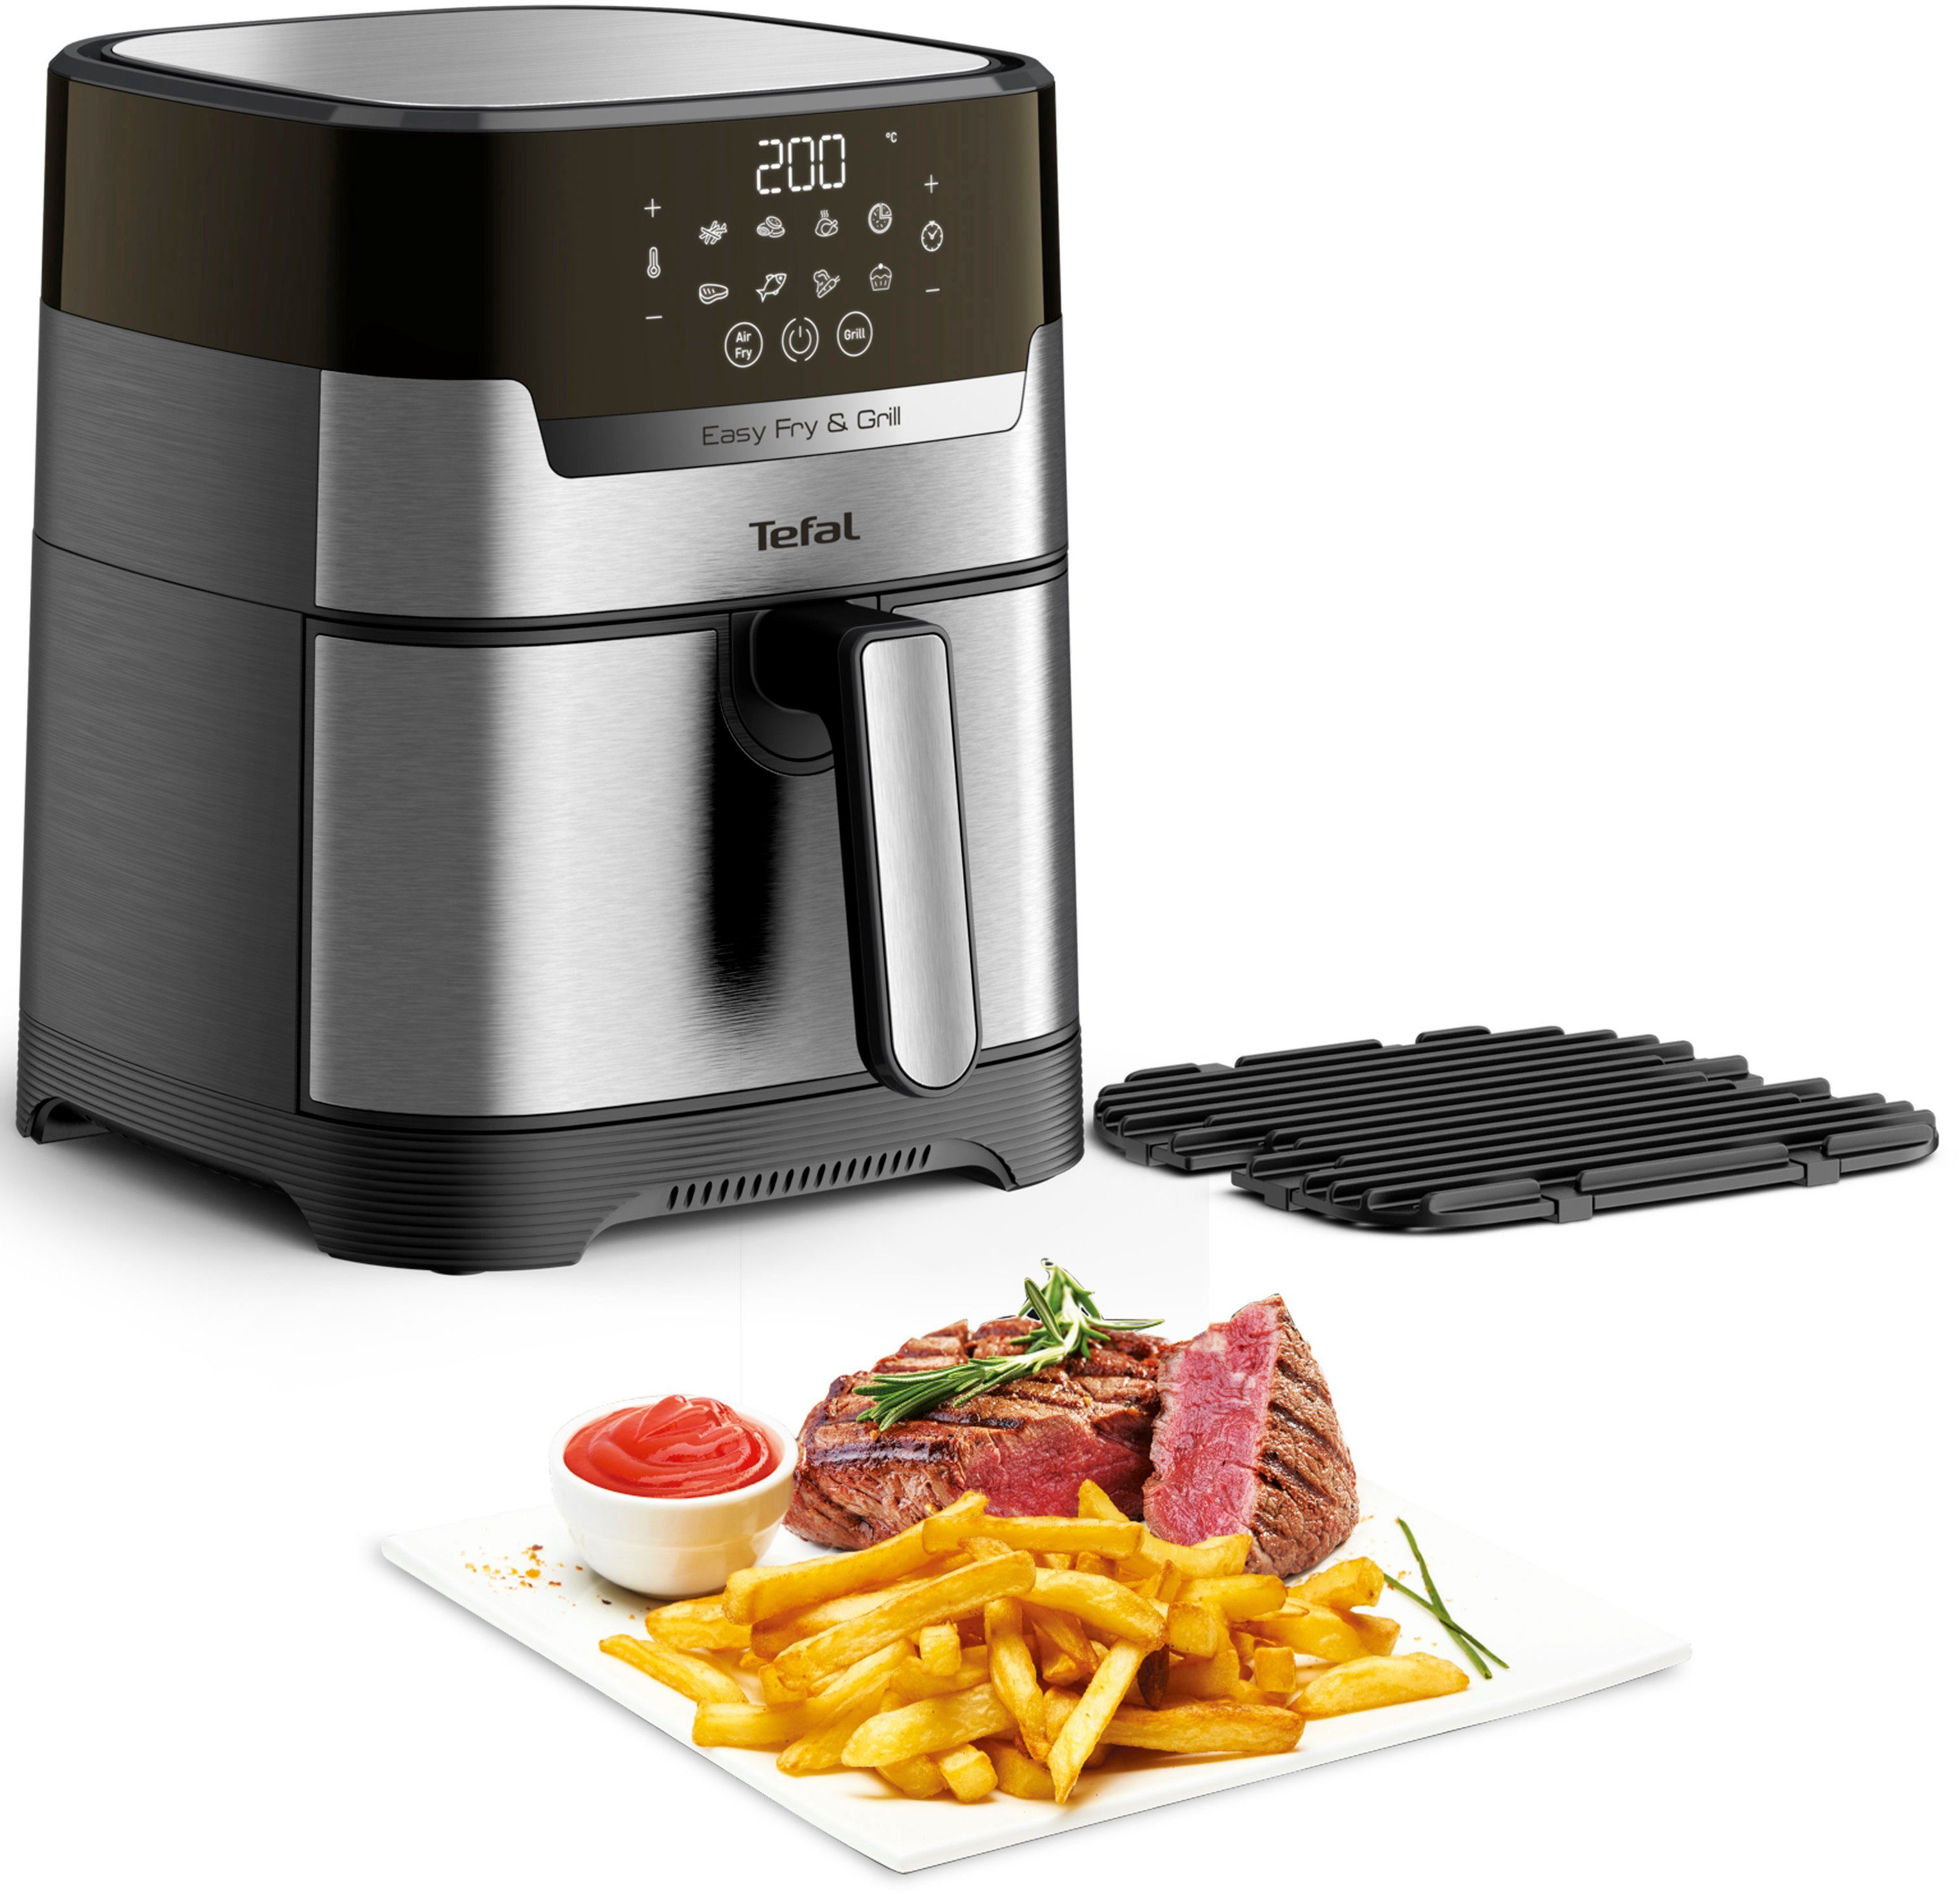 Tefal Easy Fry&Grill Precision+ Friteuse RVS